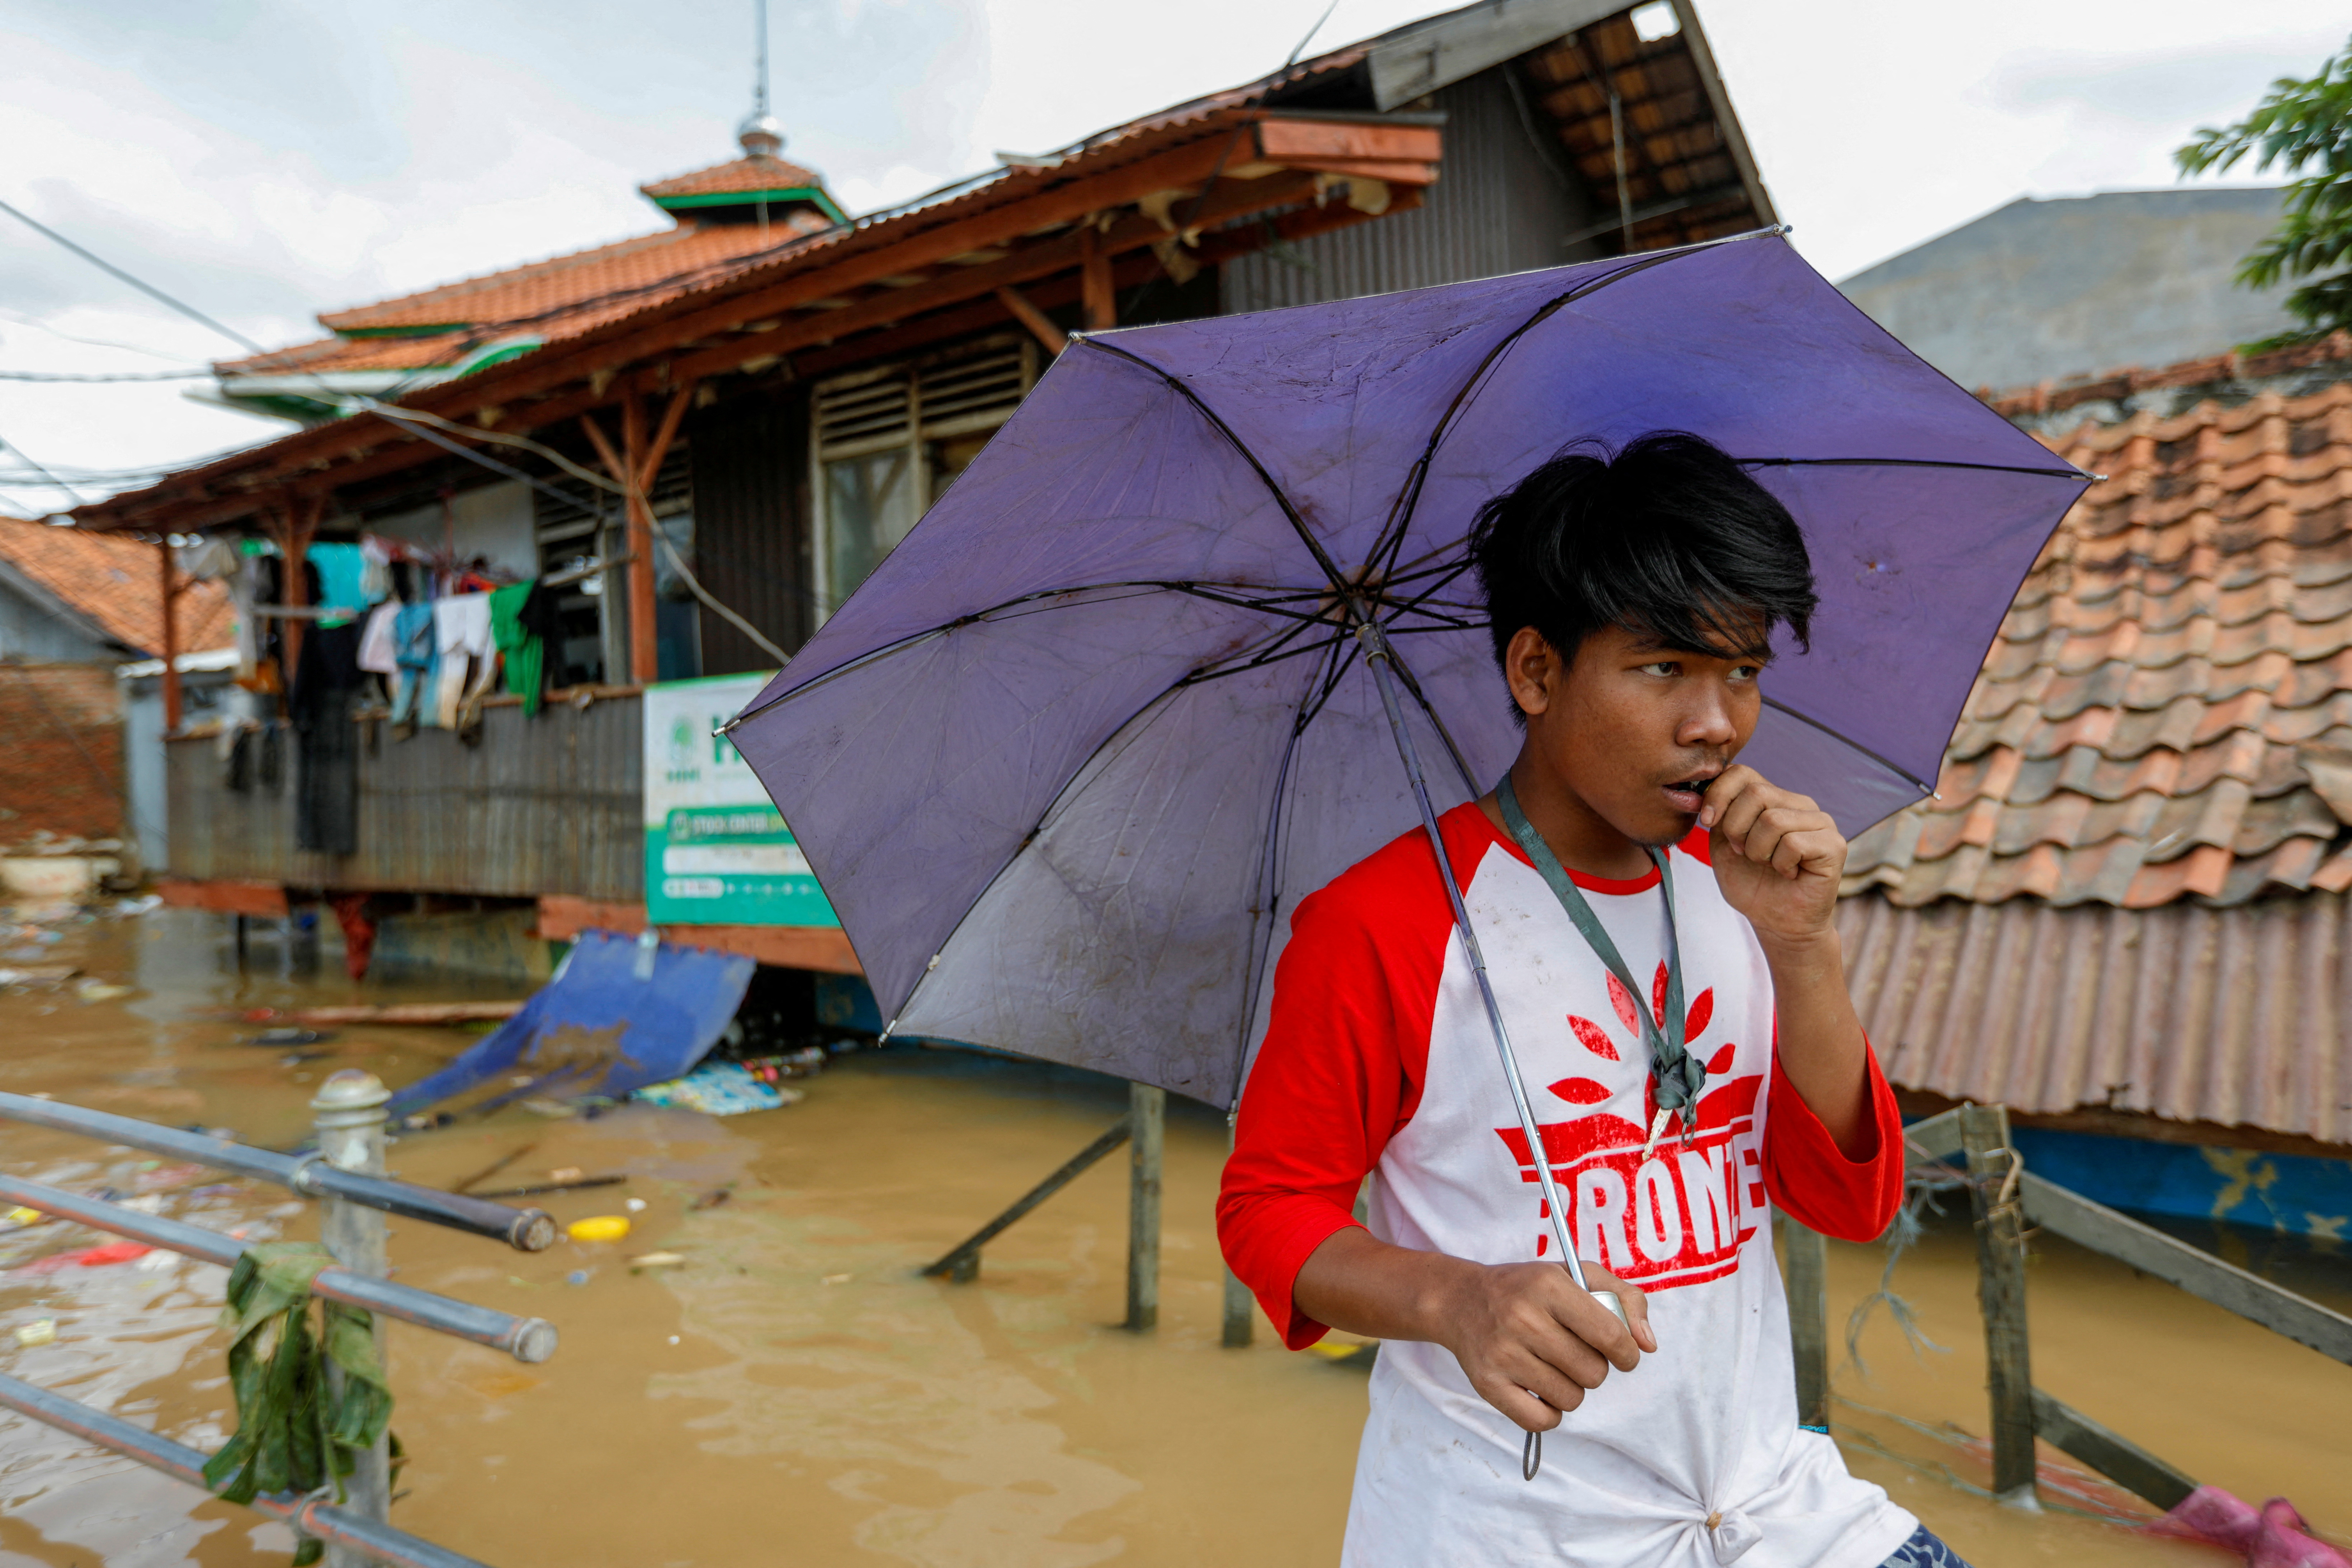 A man holds an umbrella at an area flooded after heavy rains in Jakarta